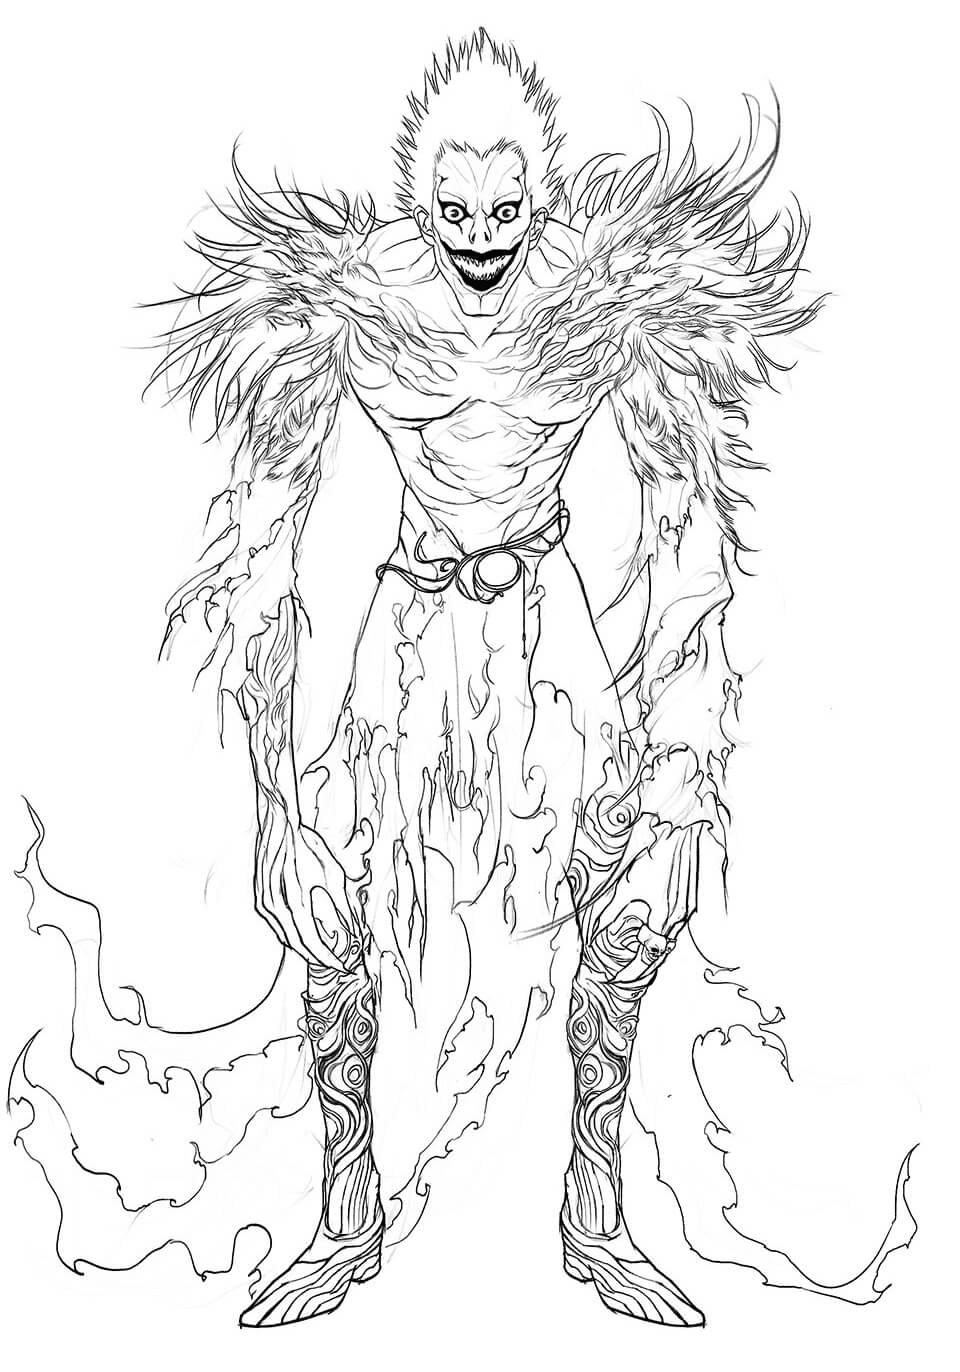 Ryuk from Death Note Coloring Pages